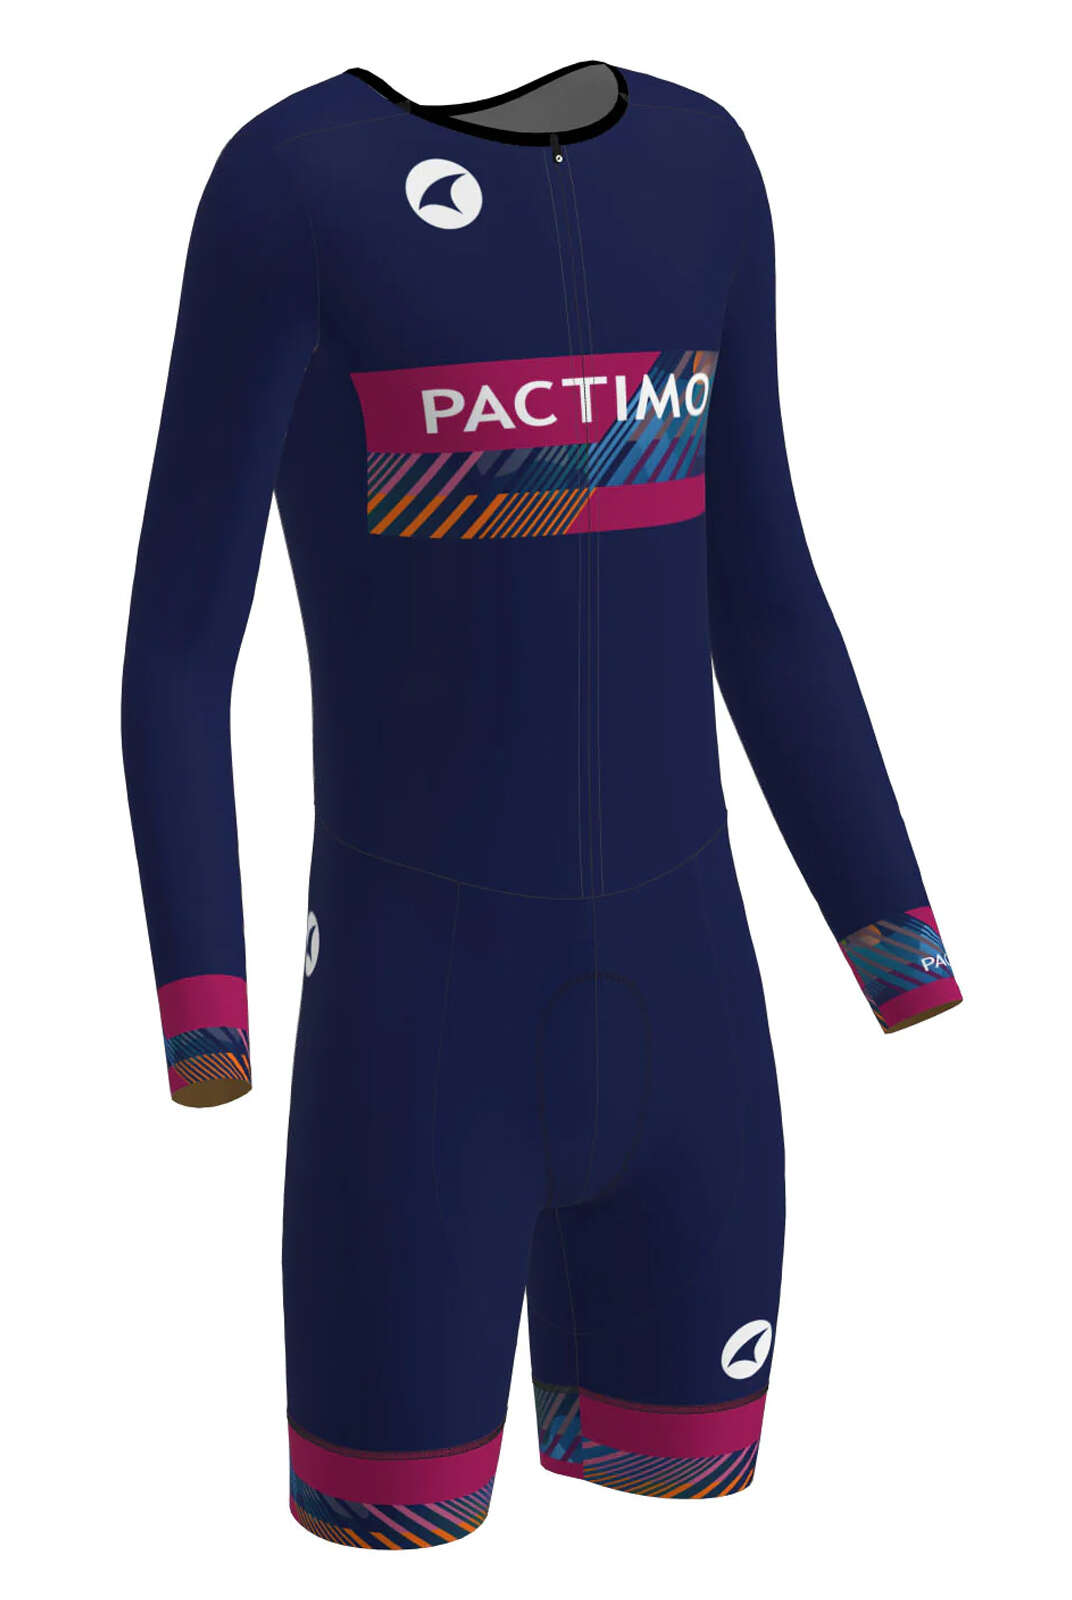 Men's Fully Printable Custom Cycling Skinsuit - Long Sleeve Front View #color-options_fully-printed